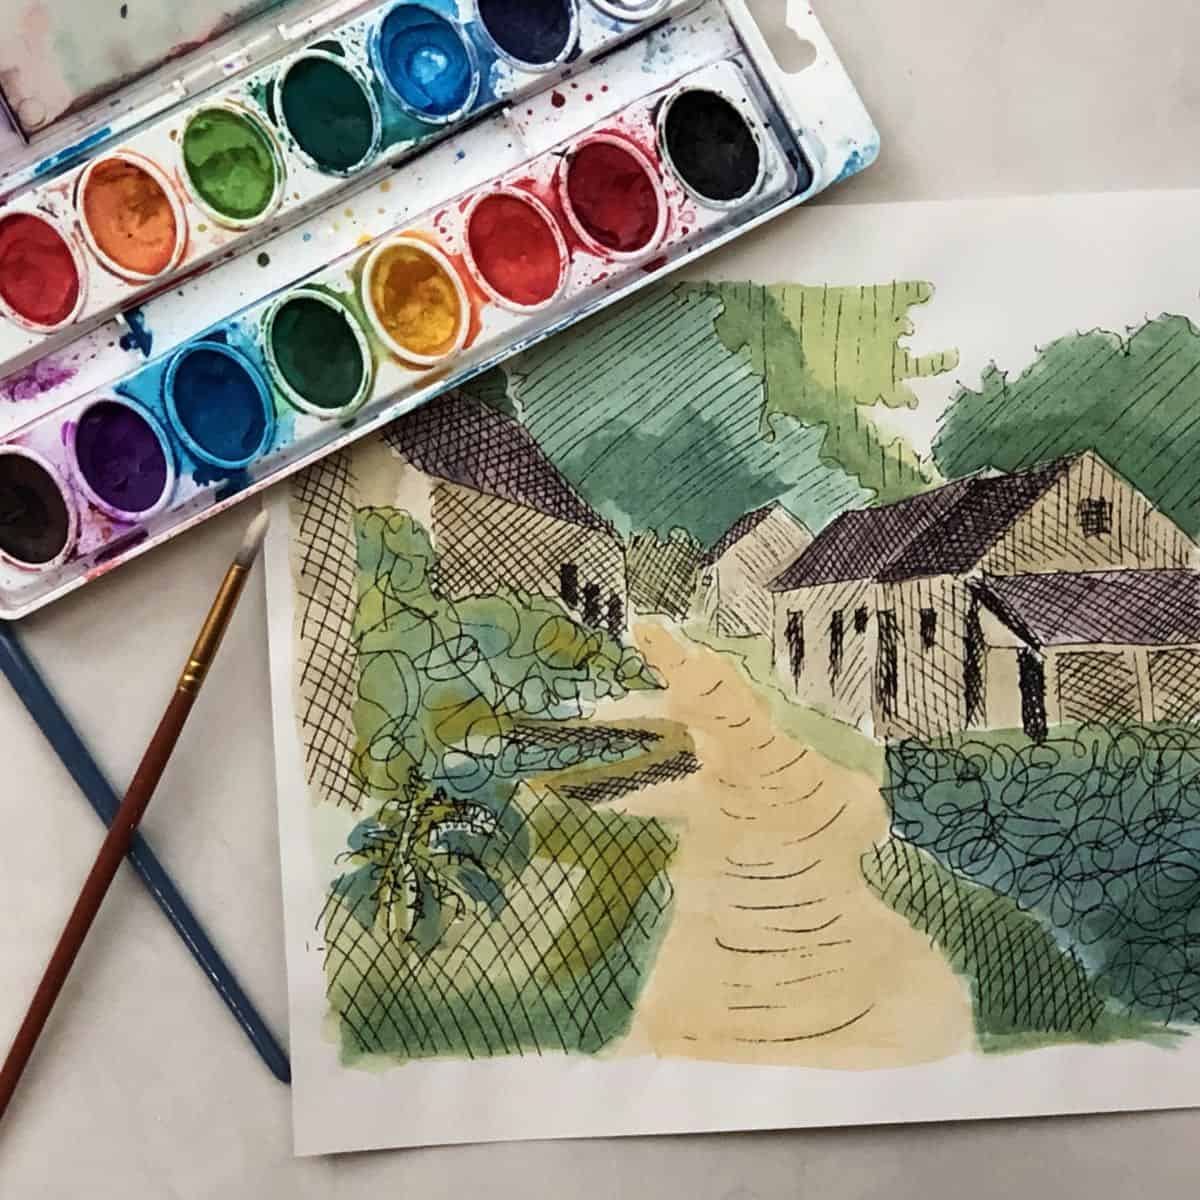 Cross hatched drawing of some French countryside houses on a dirt road with some greenery and trees in the background next to a watercolor painting set and some paintbrushes.